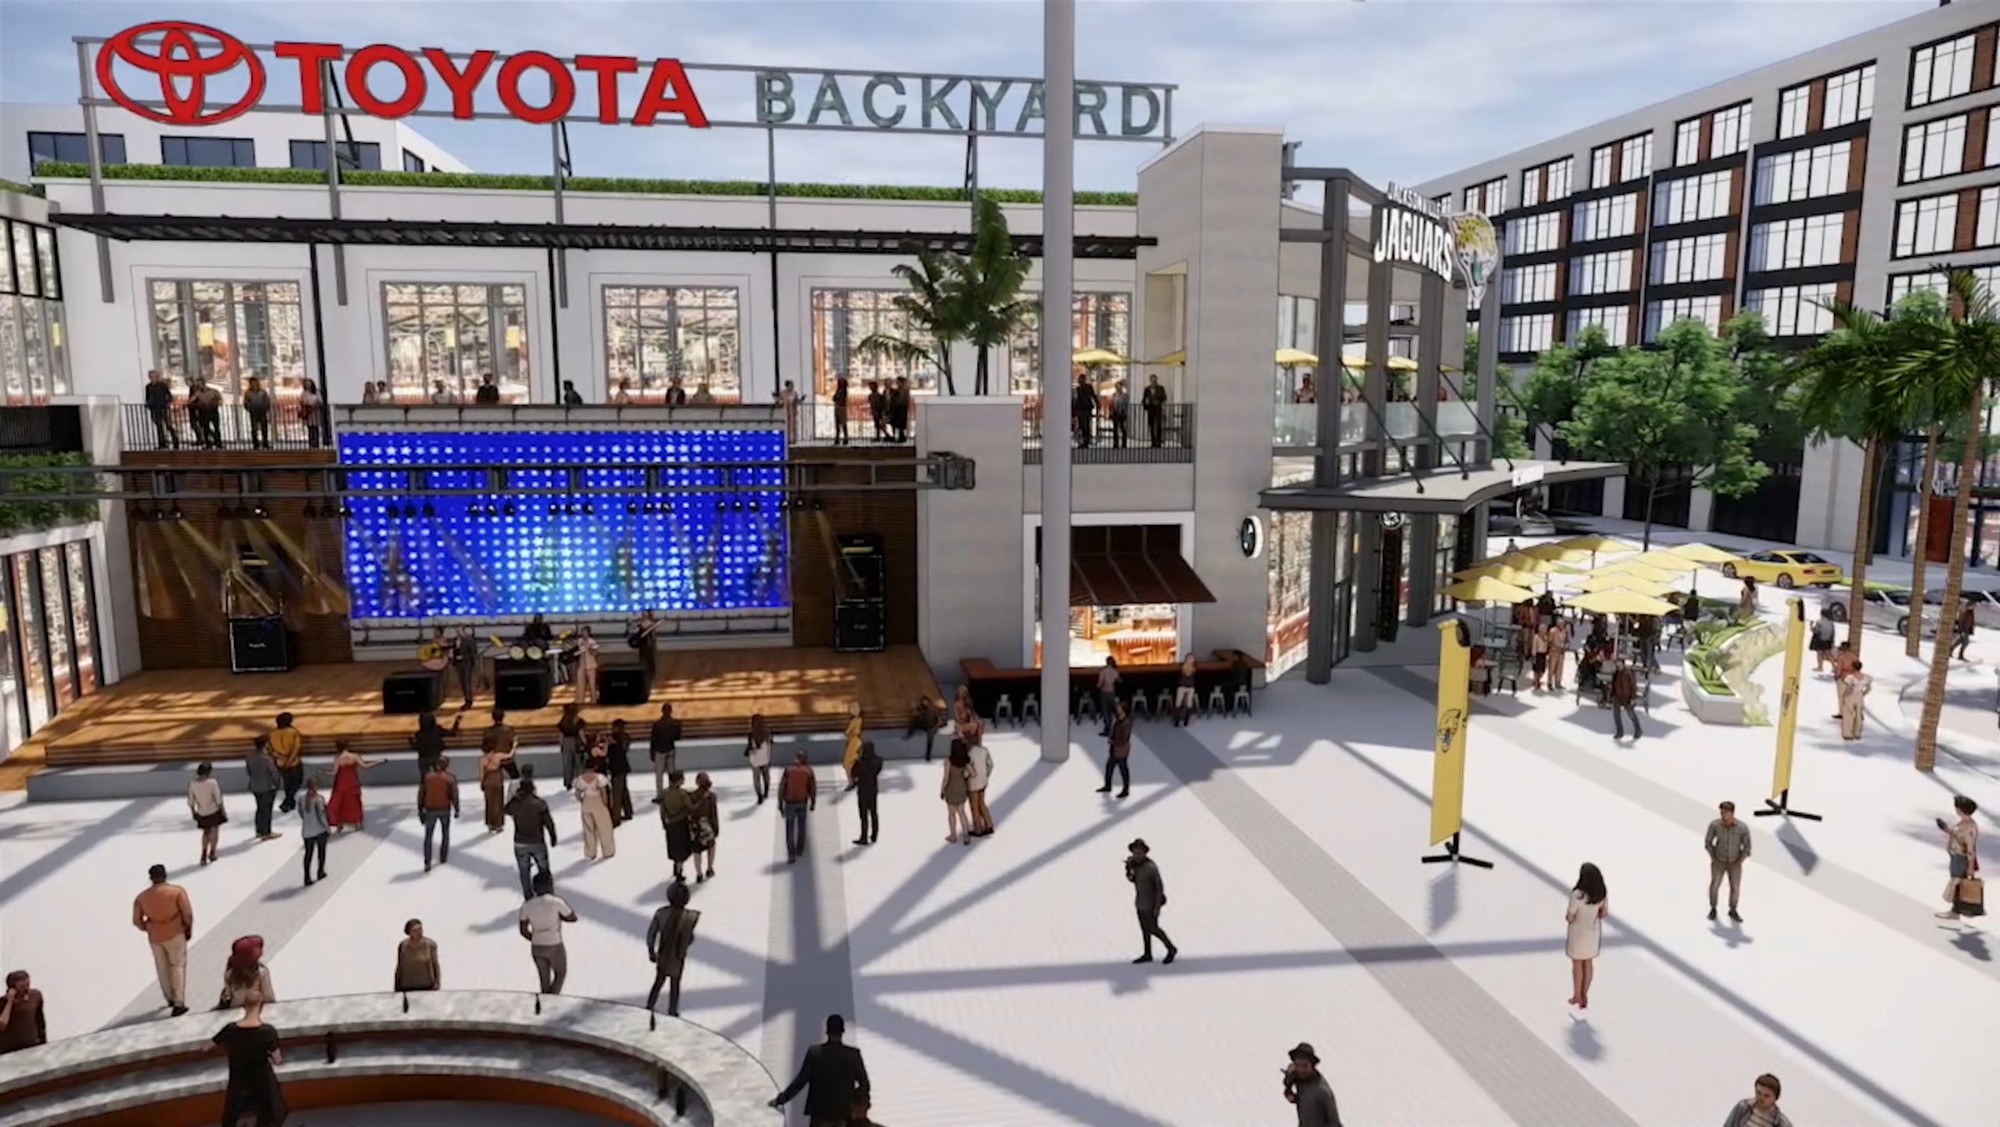 Street-level retail along with indoor and outdoor entertainment space is included in the Lot J project.